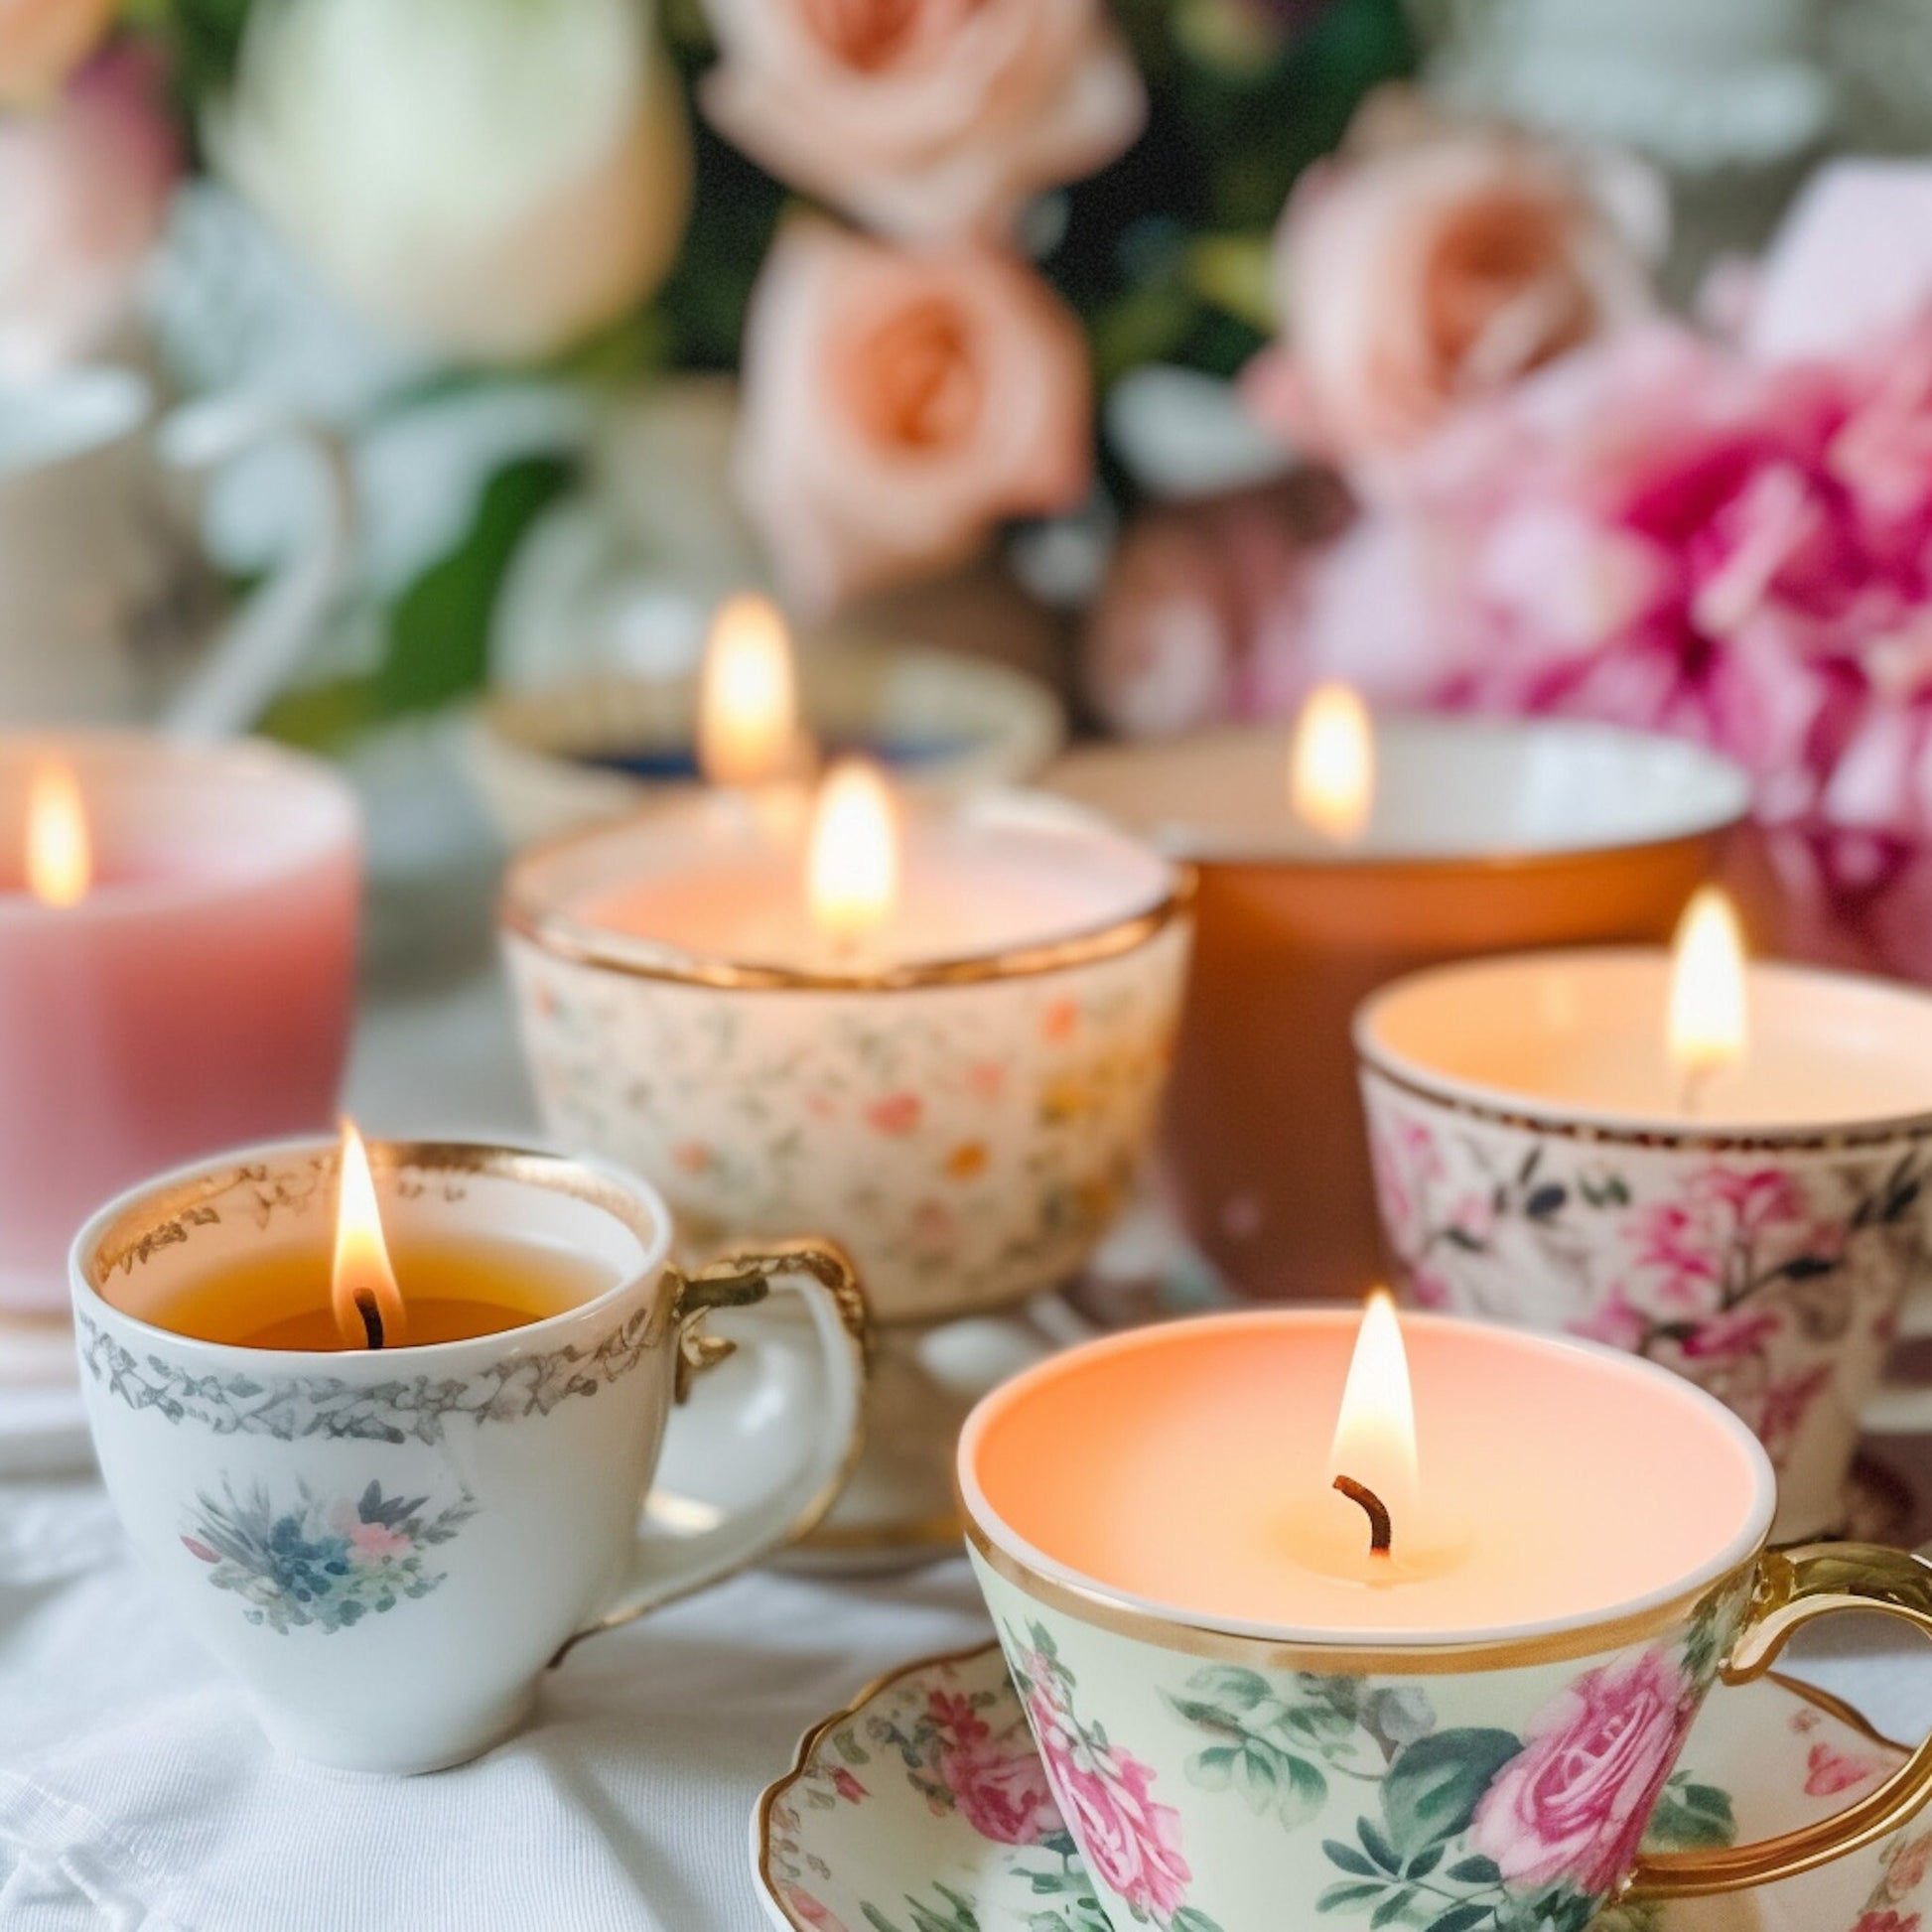 Vintage Teacup Candles  Hand-Poured for Weddings and Showers – RetroWix